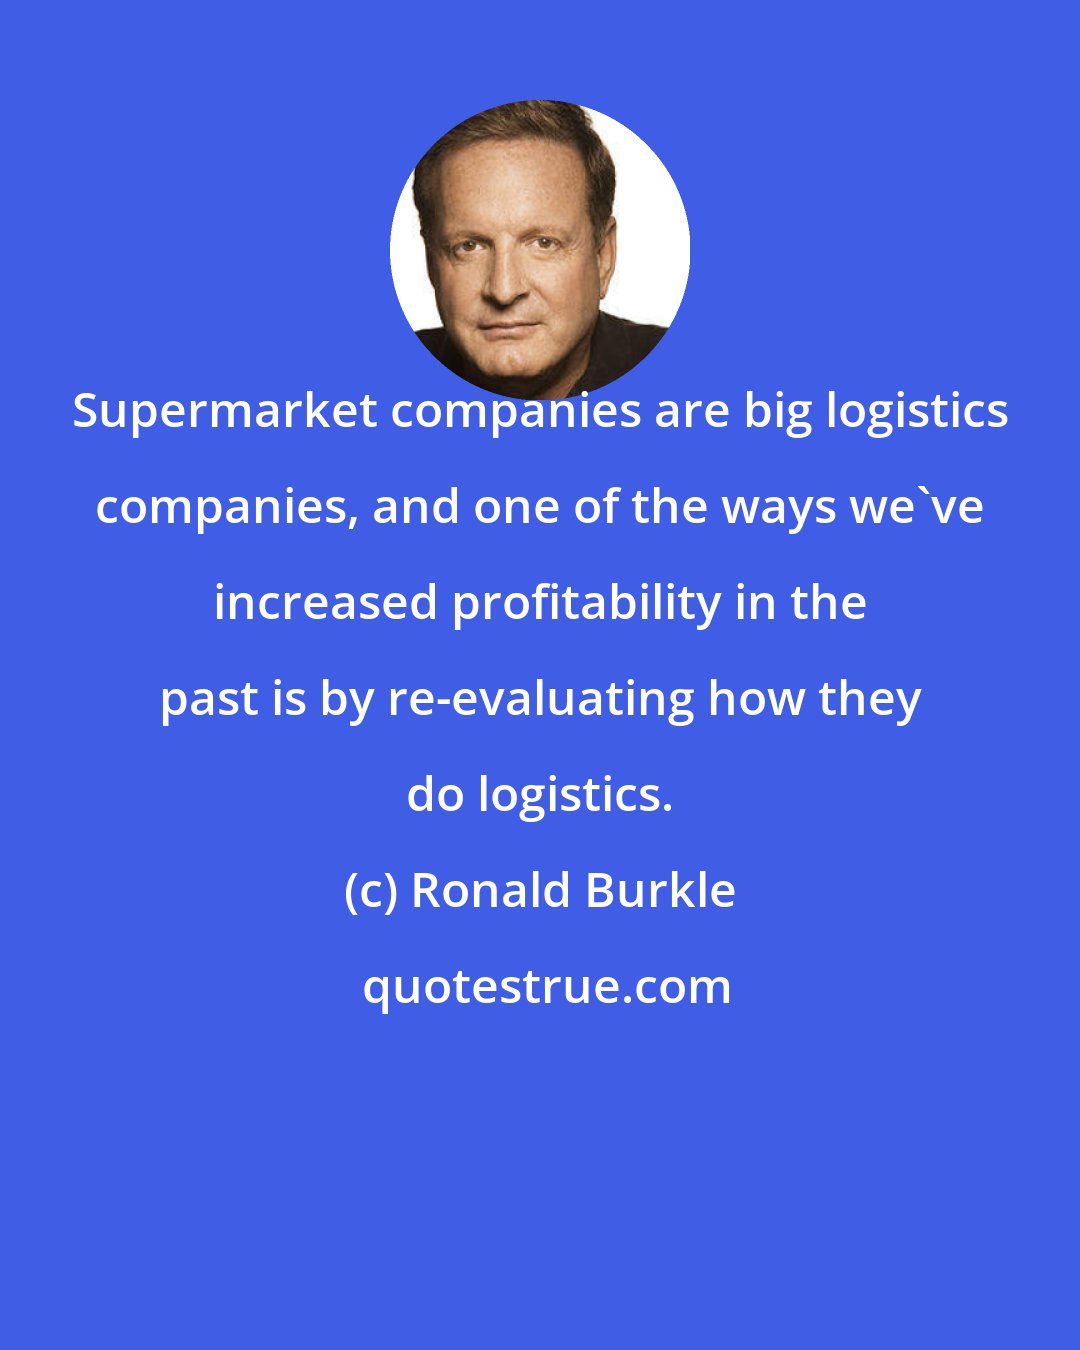 Ronald Burkle: Supermarket companies are big logistics companies, and one of the ways we've increased profitability in the past is by re-evaluating how they do logistics.